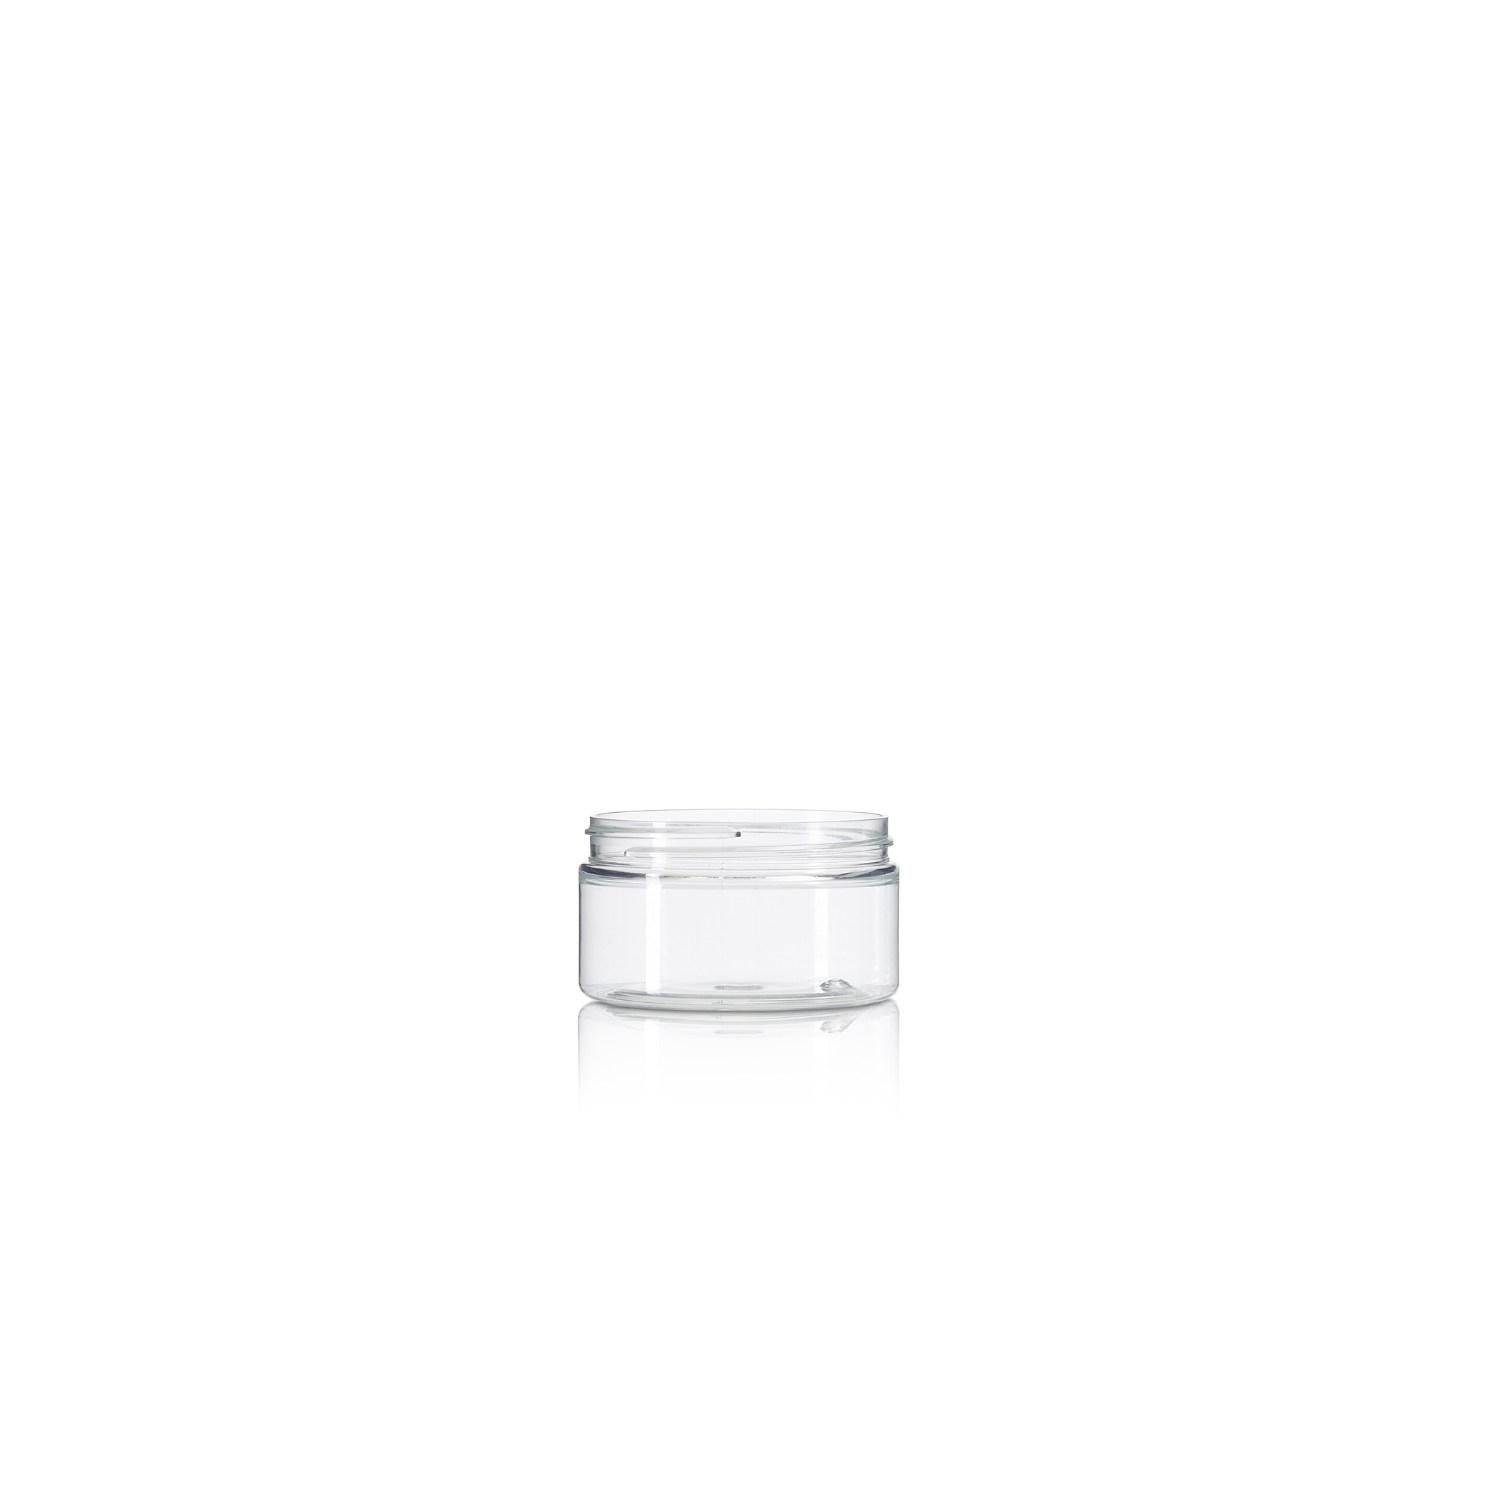 100ml Clear PET Straight-Sided Jar - 70/400 neck